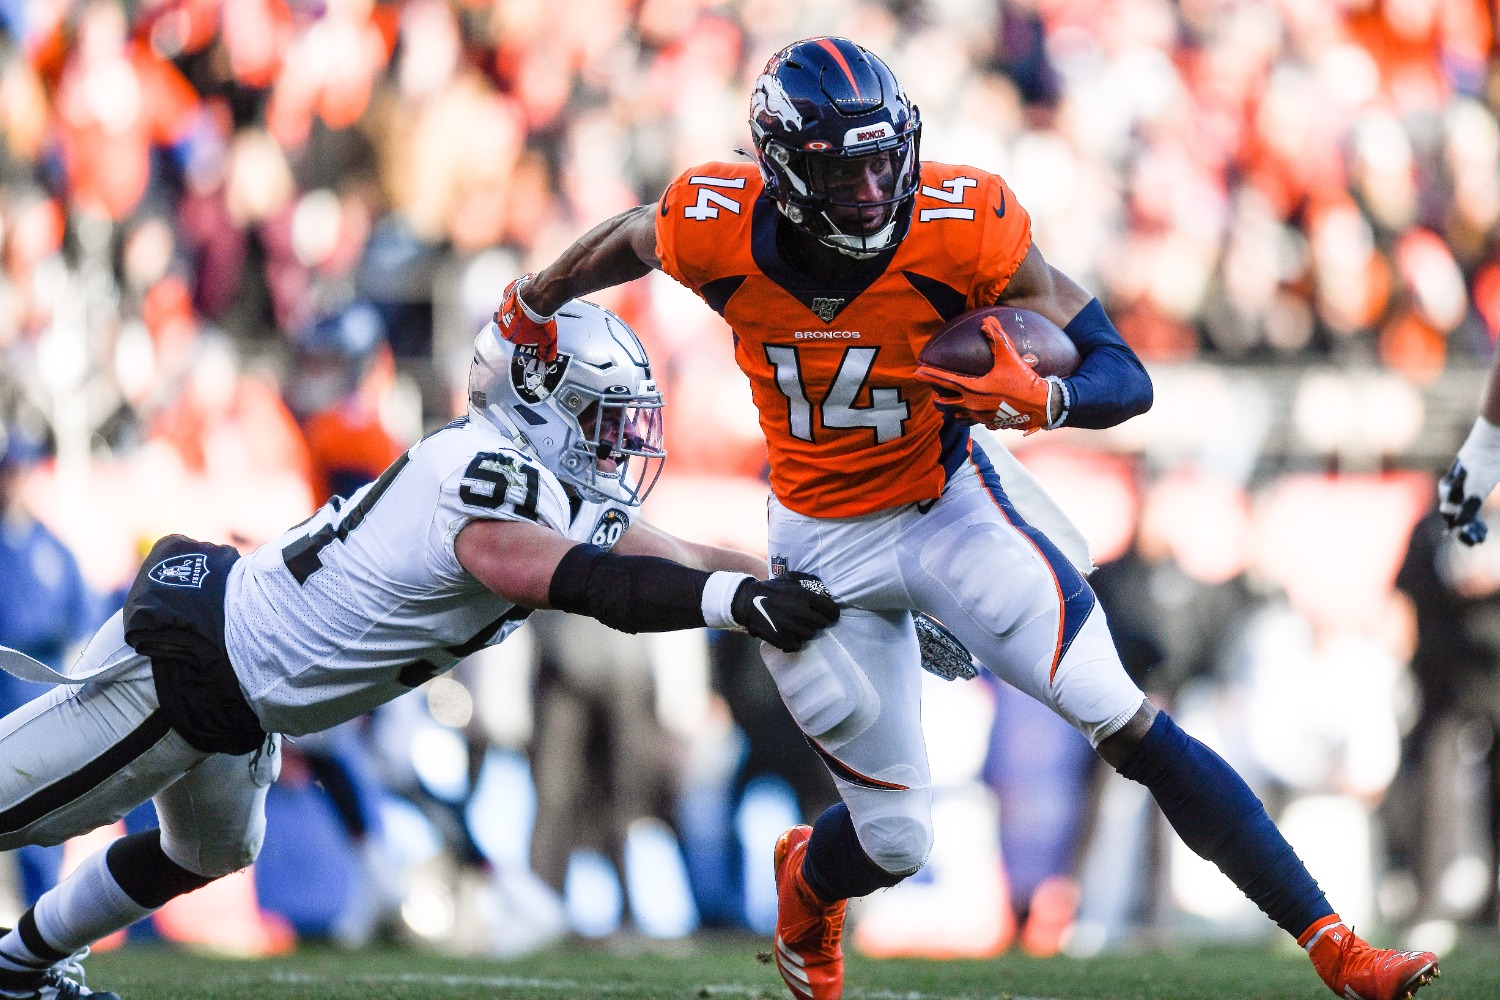 The Denver Broncos just lost Courtland Sutton for the rest of the season, which represents a brutal blow for a team with exciting potential on offense.